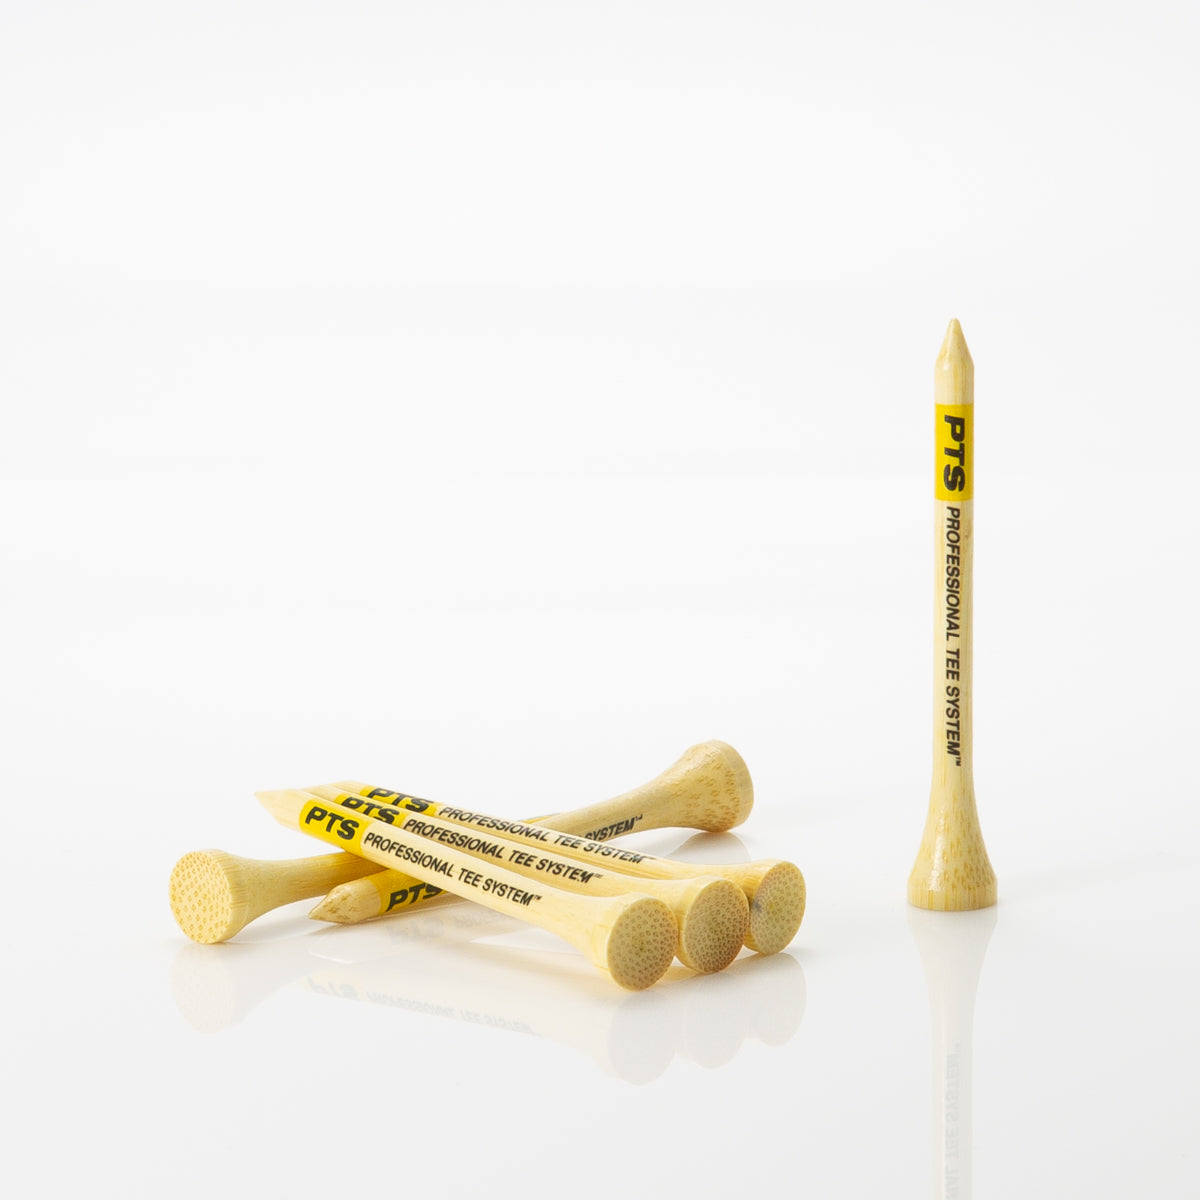 Professional Tee System™ (PTS)- 2 3/4" Bamboo Tees